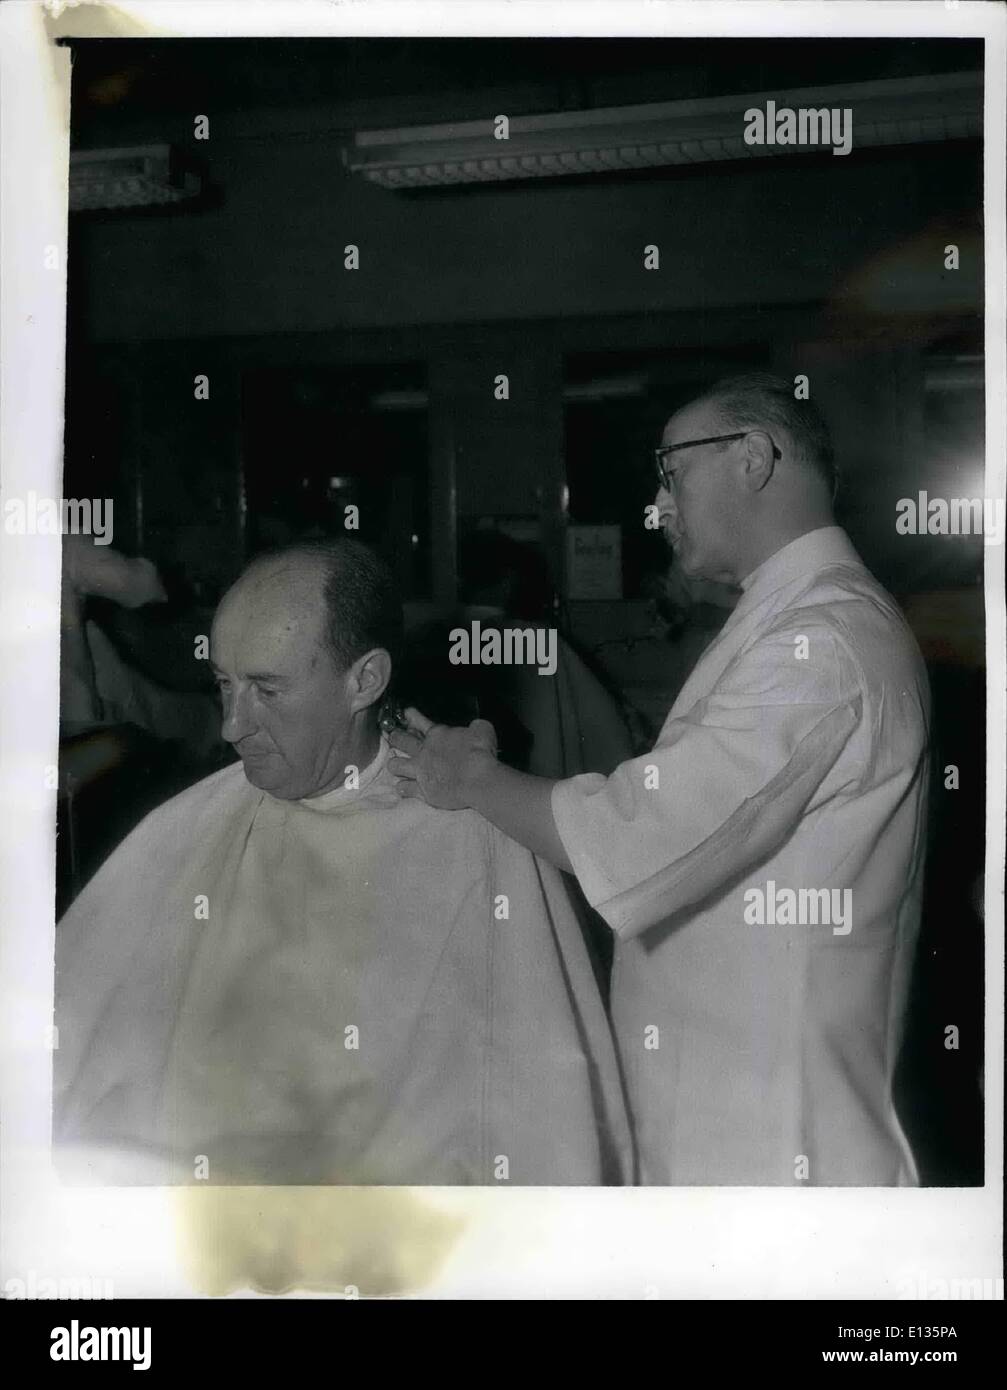 Feb. 28, 2012 - Adlai Stevenson during 1952 election campaign taking haircut between two engagements at RR Station. Stock Photo